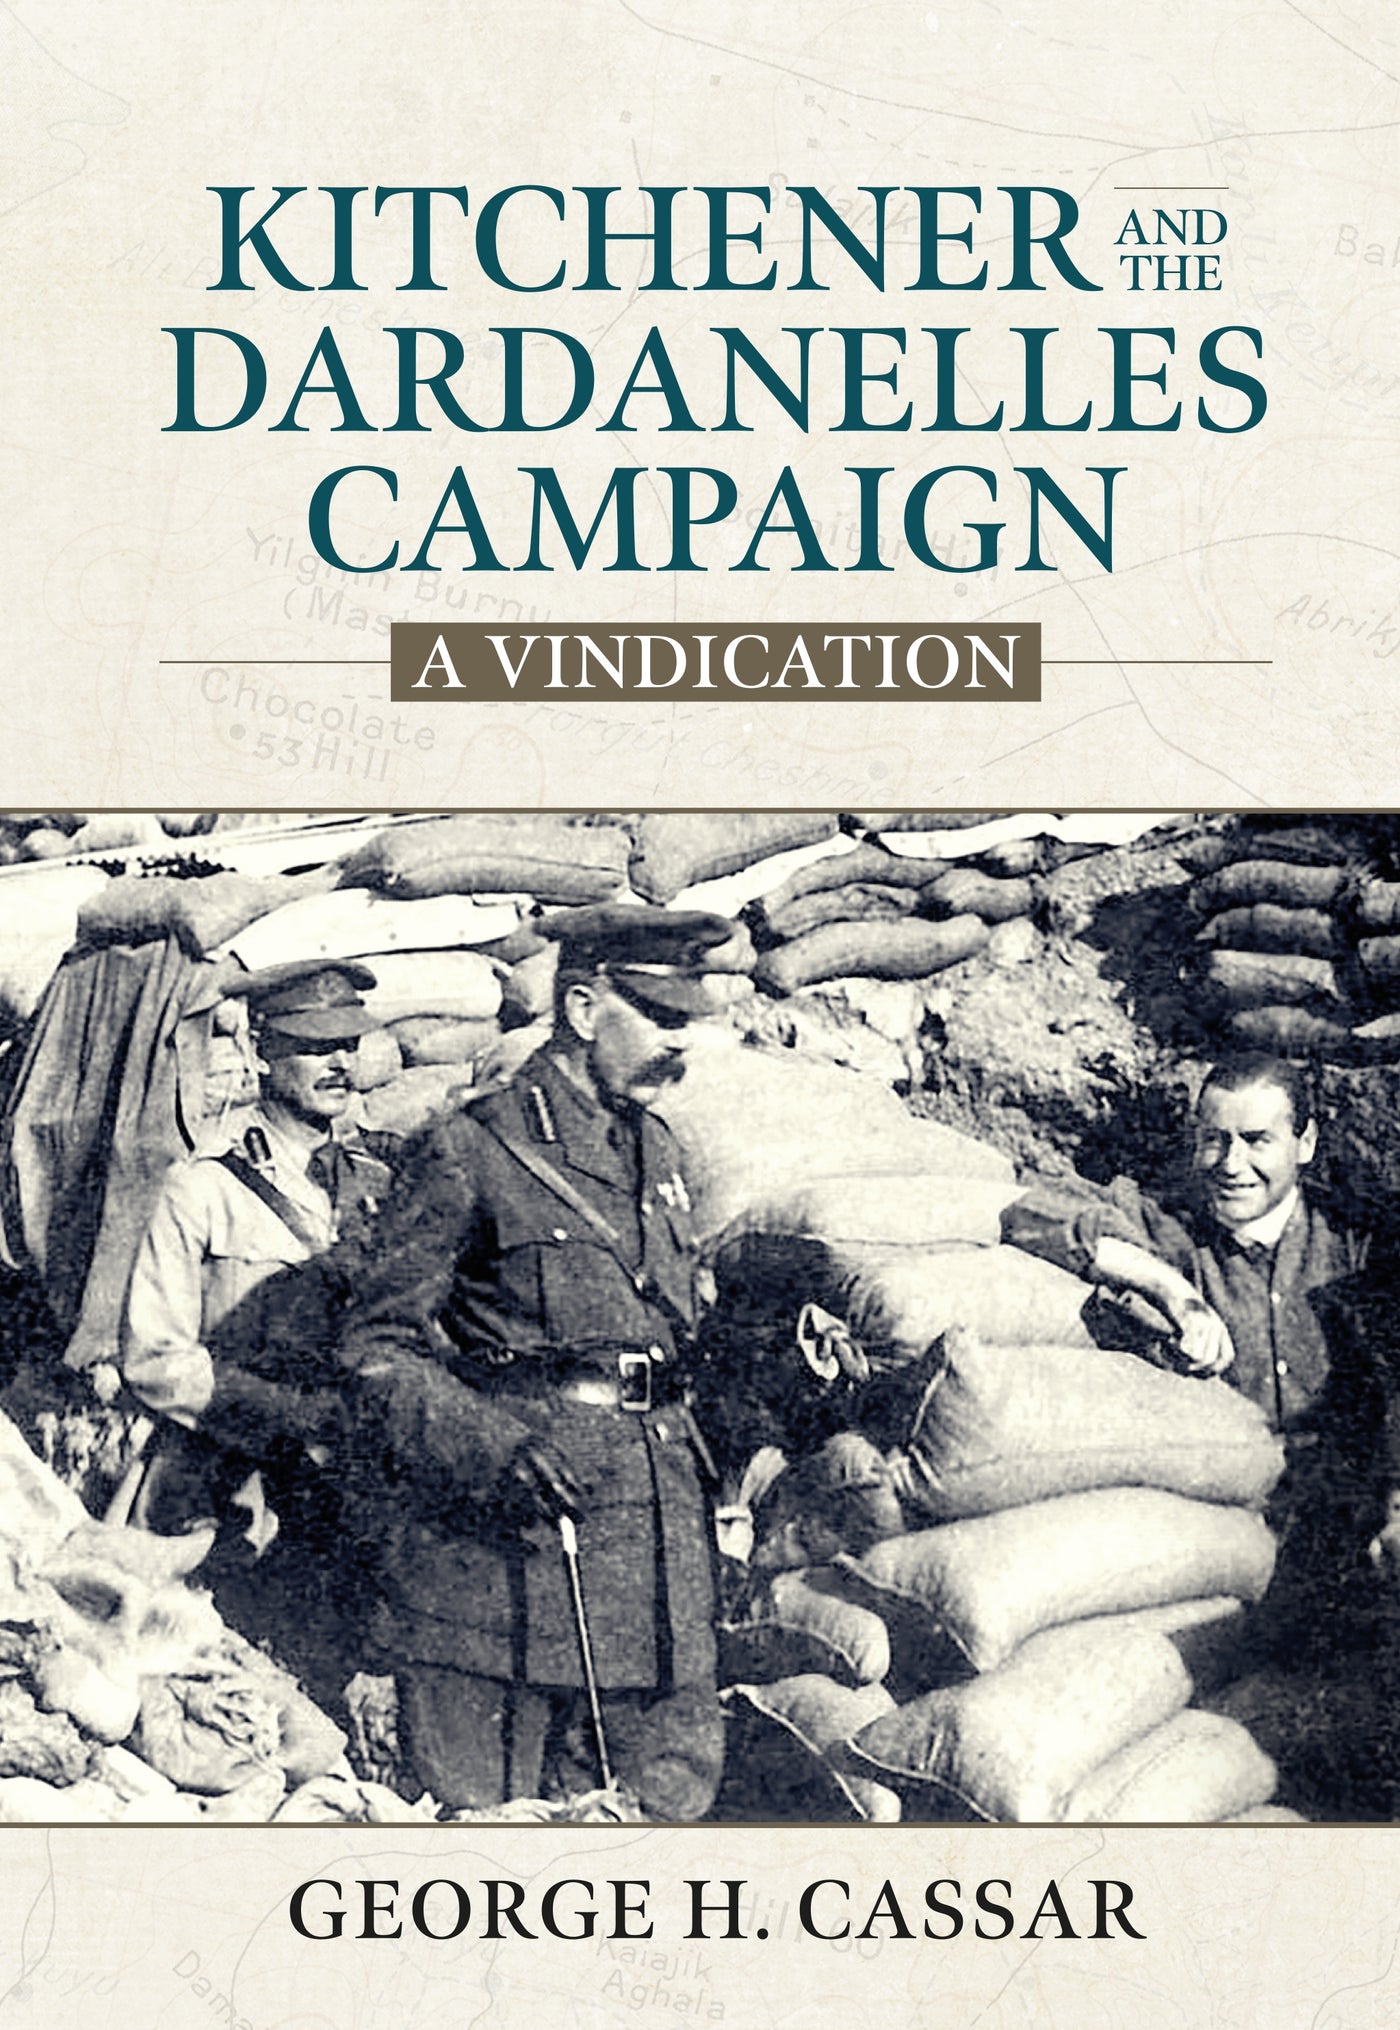 Kitchener and the Dardanelles Campaign